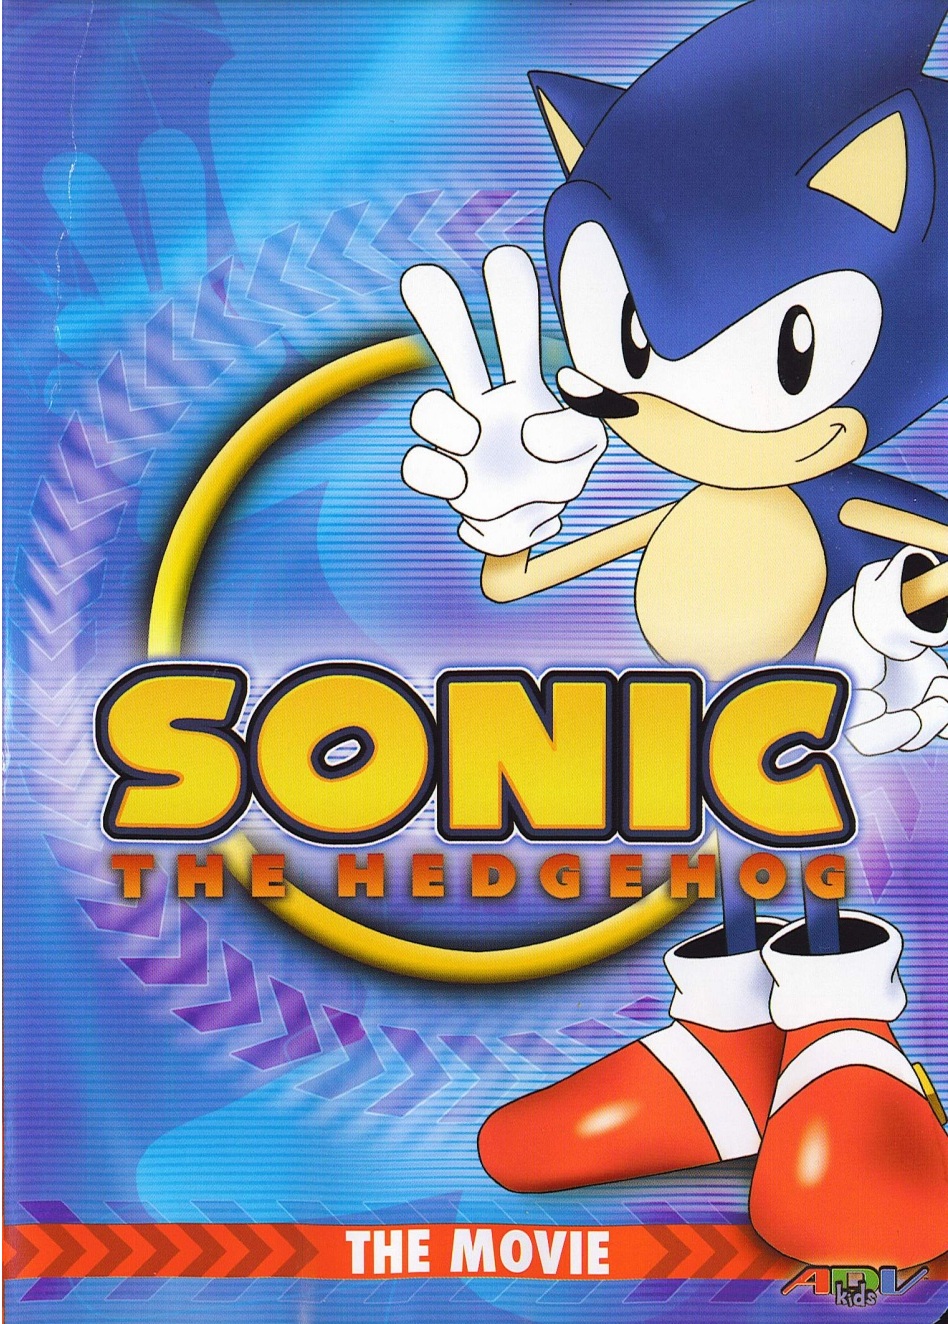 Sonic the Hedgehog: The Movie / Awesome - TV Tropes